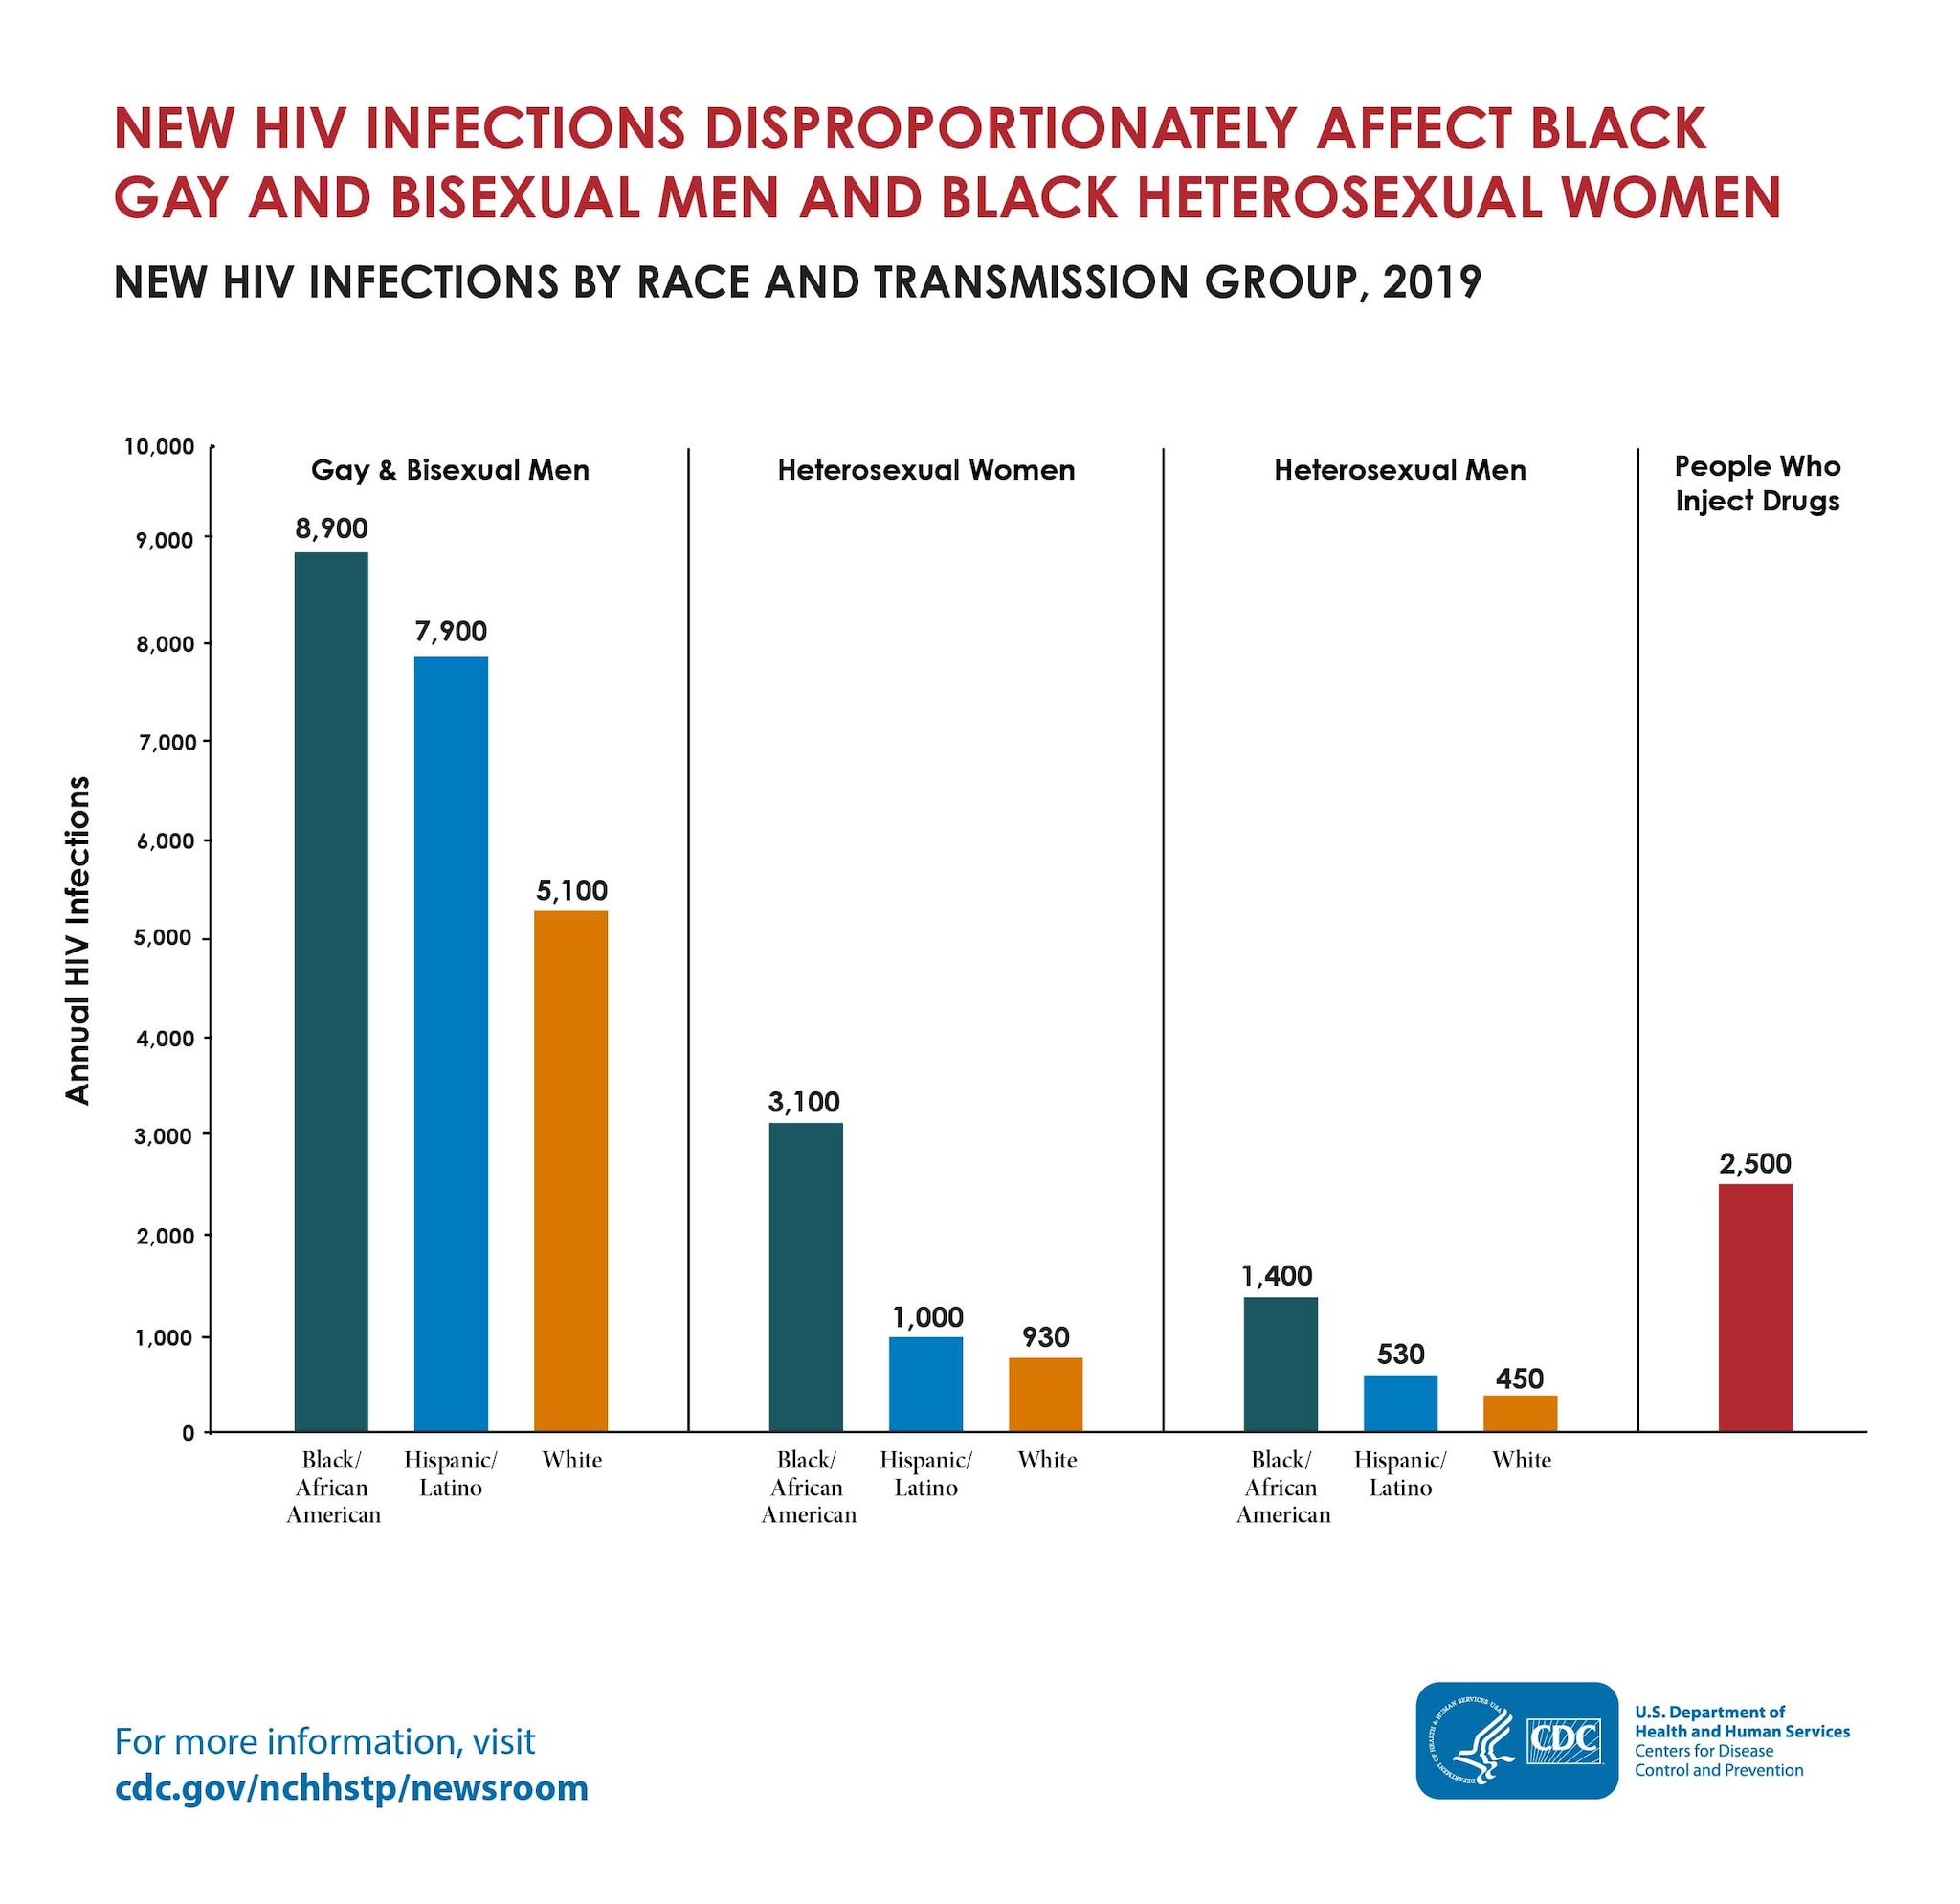 The bar chart shows the number of new HIV infections by race and ethnicity and transmission category